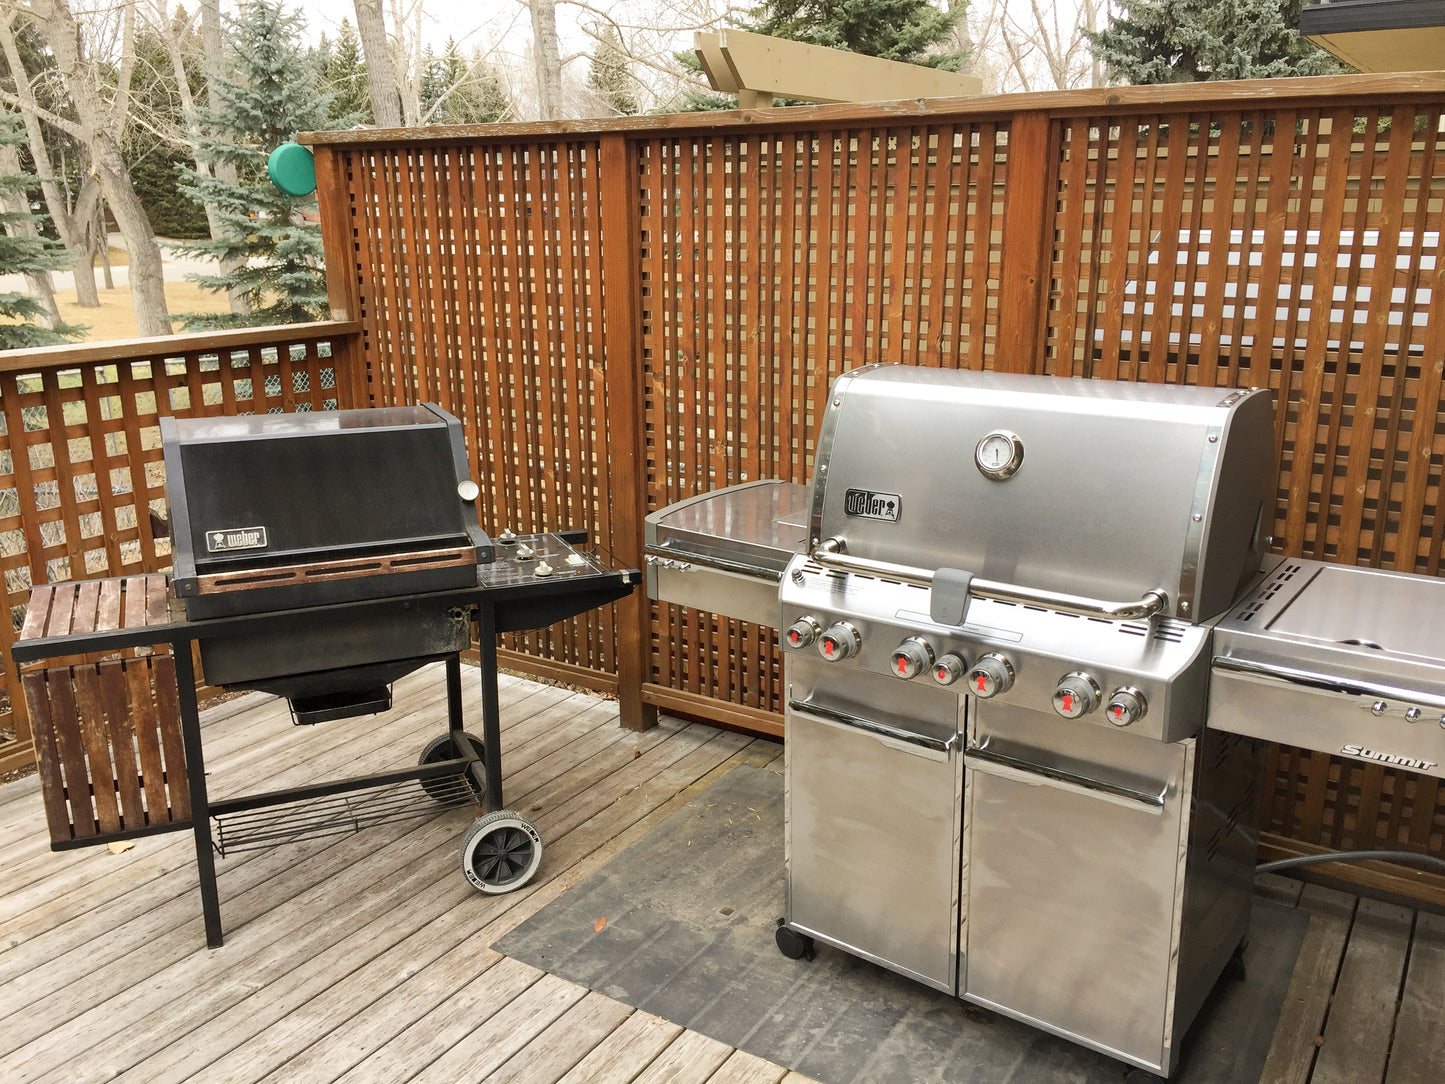 Weber Summit S-470 – Natural Gas | The Summit series represent the tippity-top of Weber’s bbq offering. With a ton of extra features including a ceramic infrared rotisserie burner, you’ll be set to grill all summer long | Barbecues Galore: Etobicoke, Oakville, Burlington & Calgary